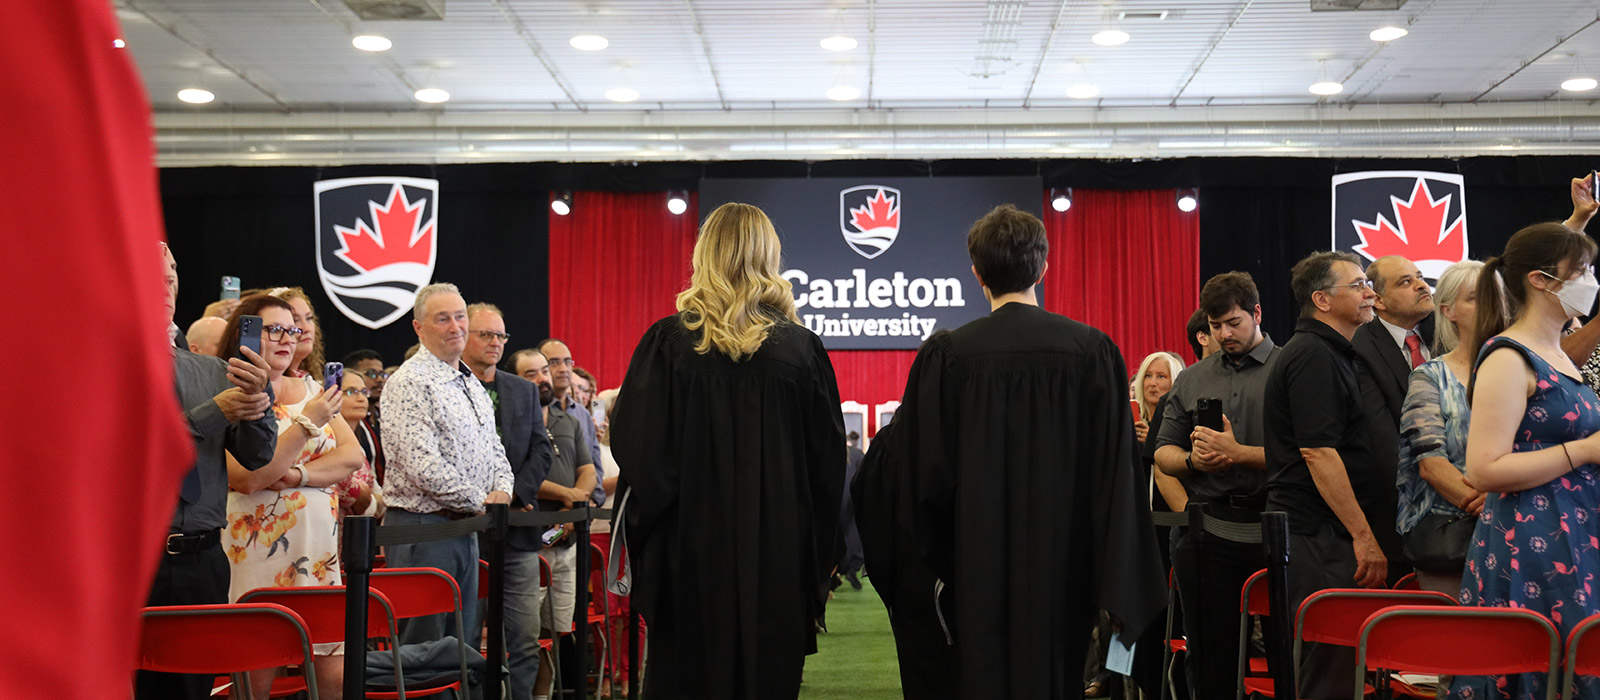 Two graduates makes their way towards the stage down a row with crowds on both sides.